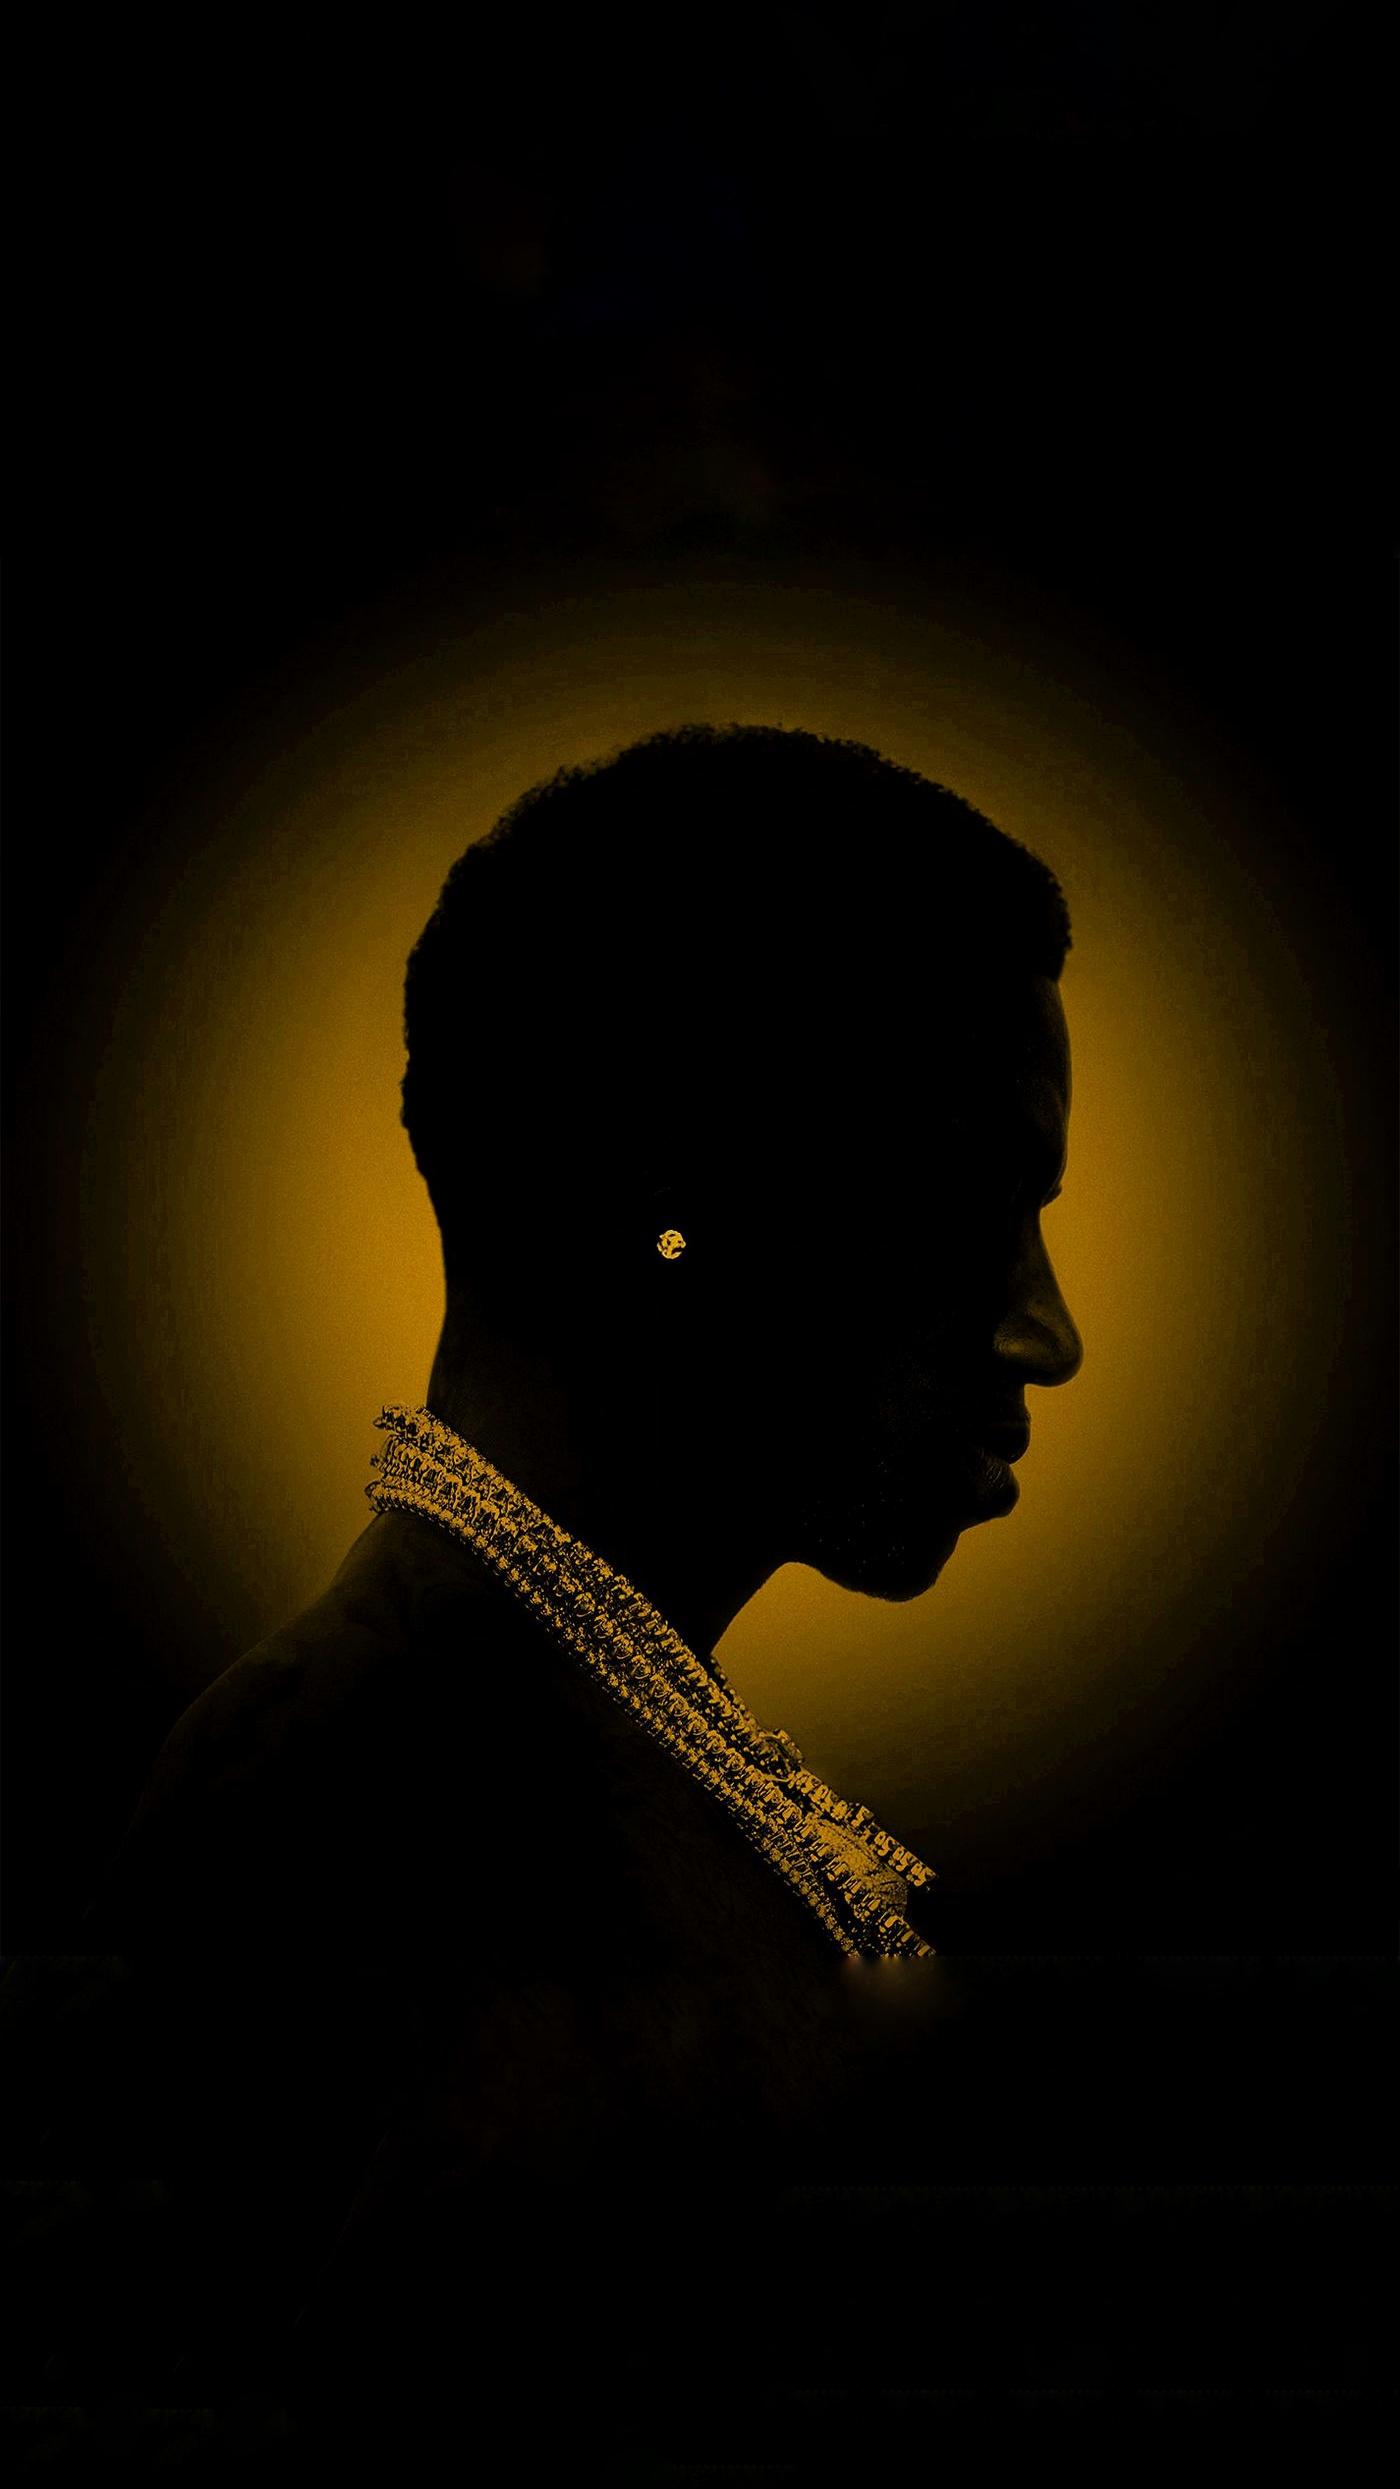 gucci mane wallpaper,backlighting,darkness,silhouette,human,photography